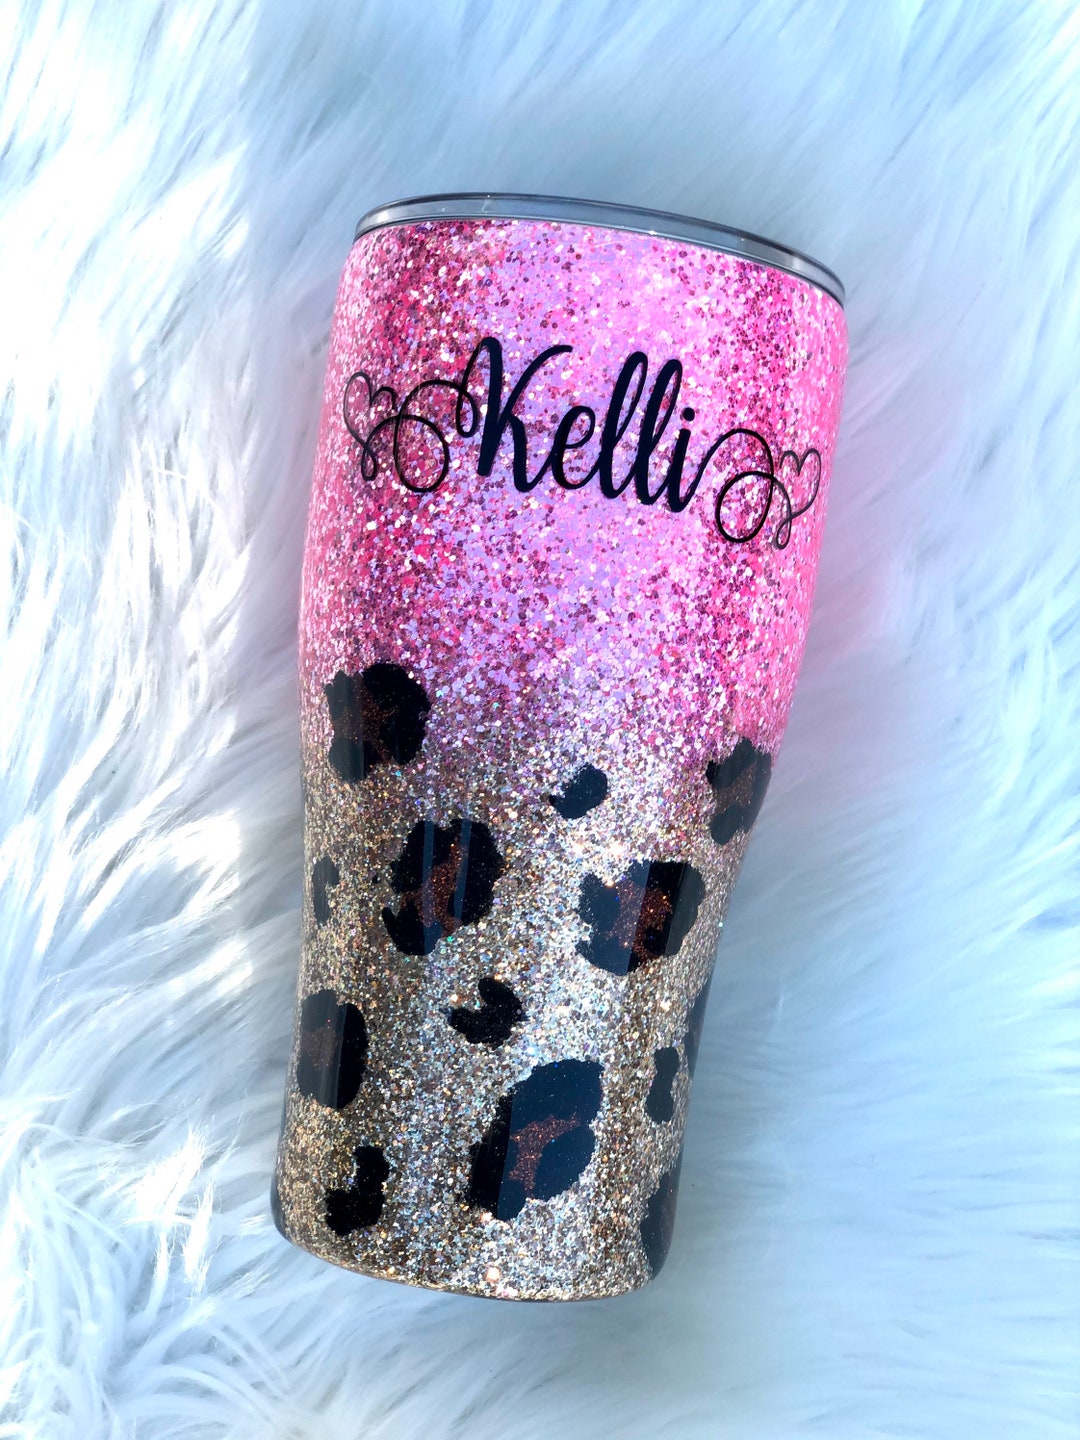 Leopard Print Tumbler Gifts for Women, Cheetah Print Custom Cups, Sister  Birthday Tumbler Gift Travel Mug, Valentines Cups Gifts for Friend 